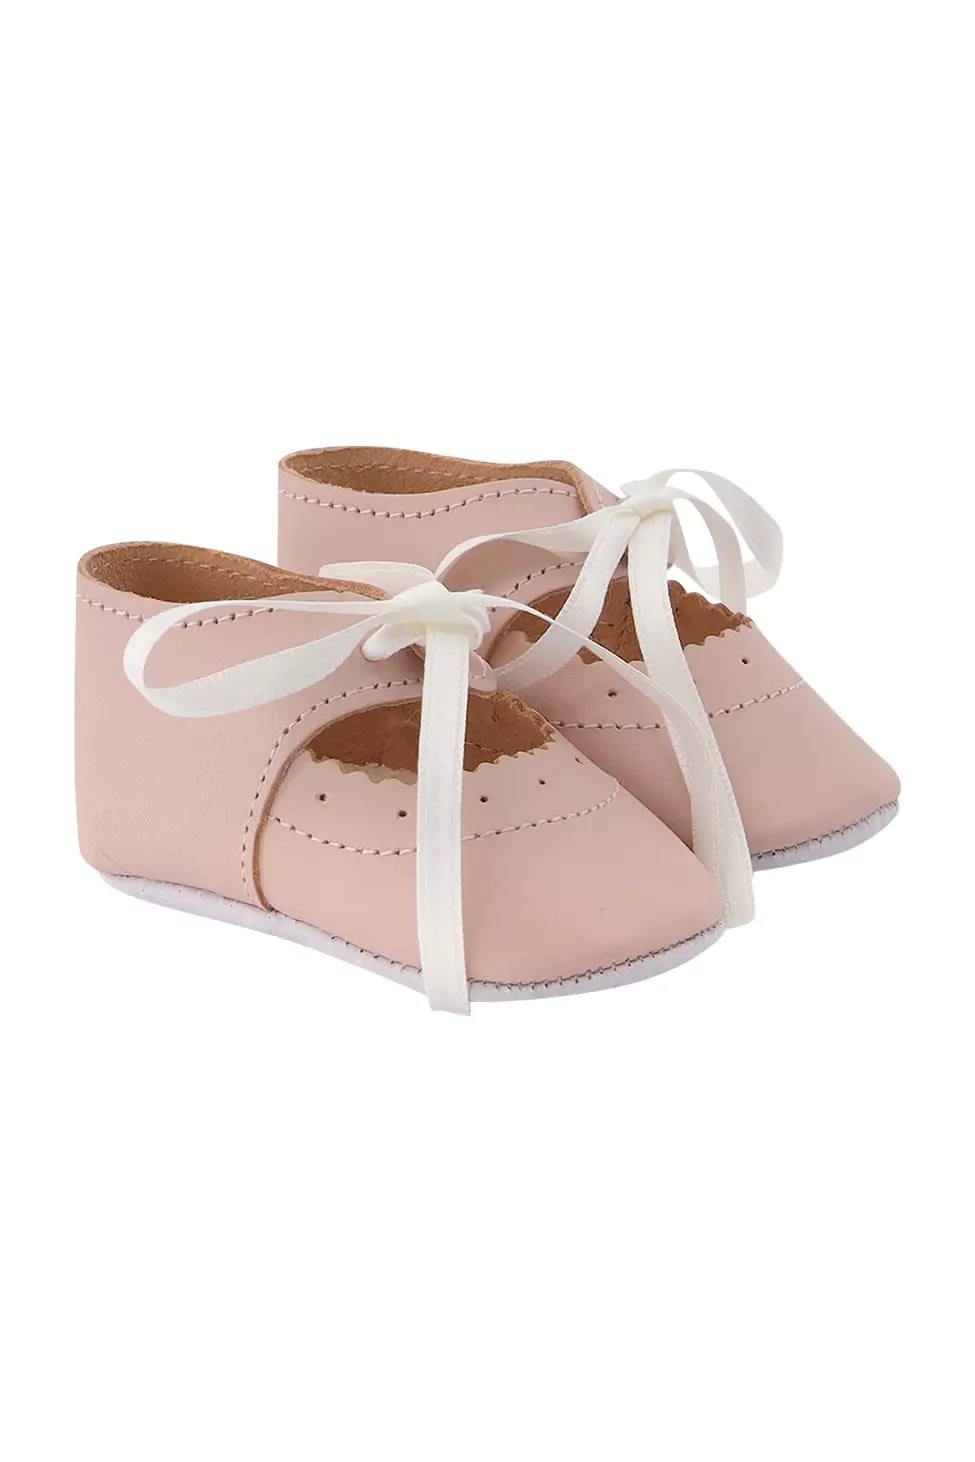 Tartine Et Chocolat Kids' First Steps Shoes With Bow In Pink